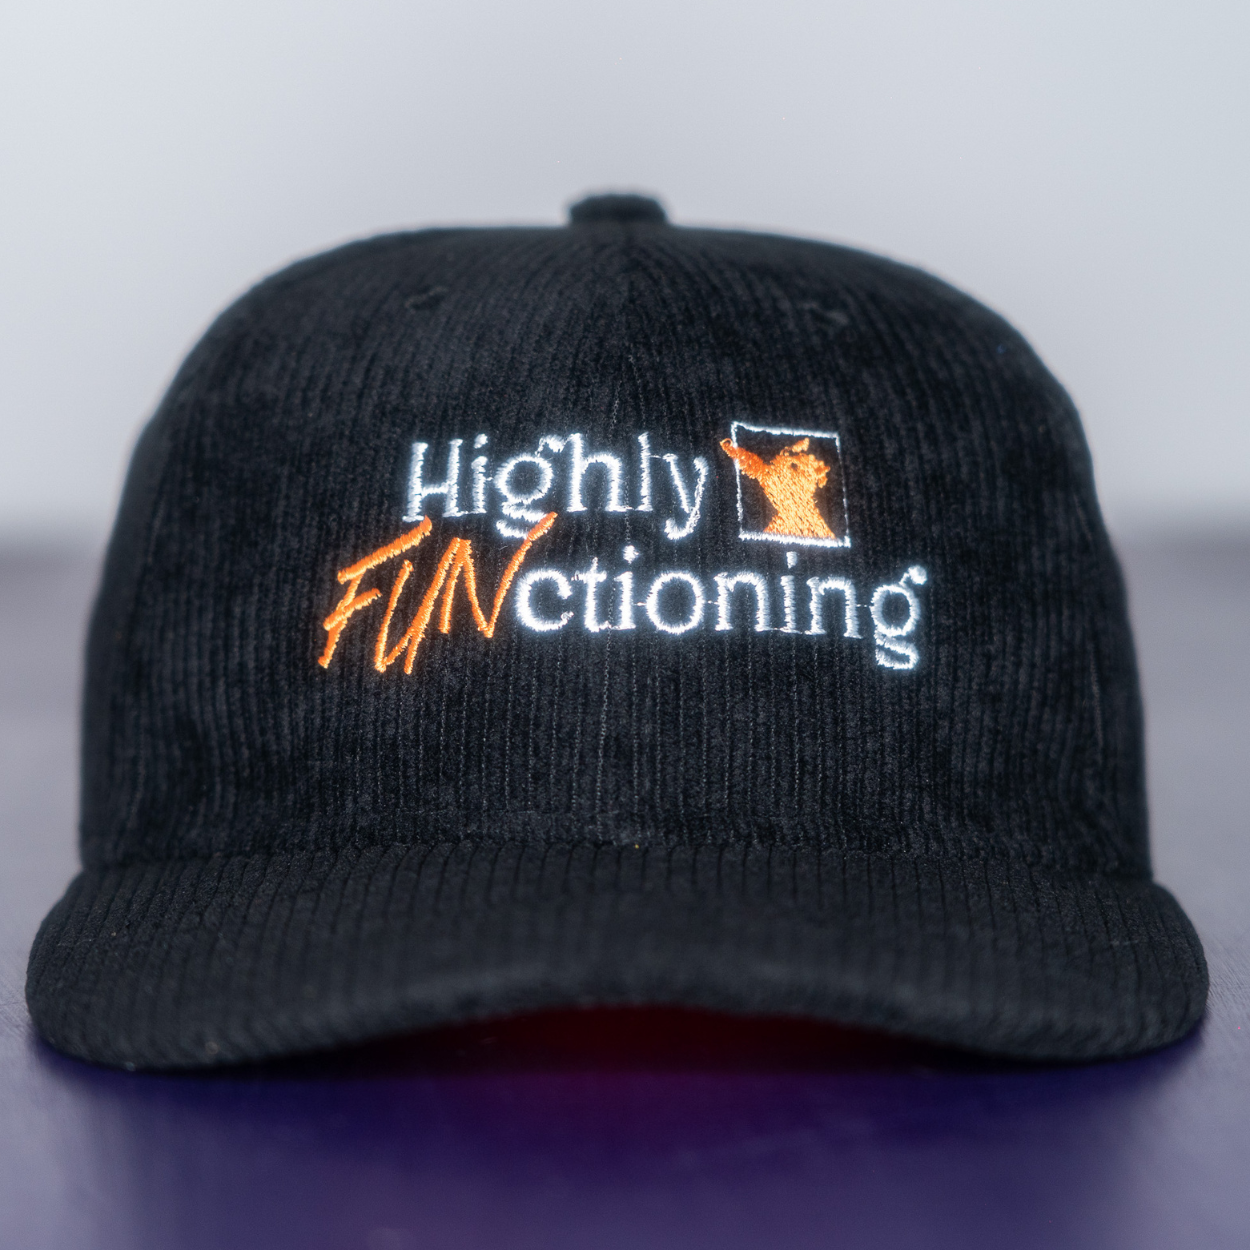 Retro Corduroy Cap - "Highy FUNctioning" Embroidered Hat